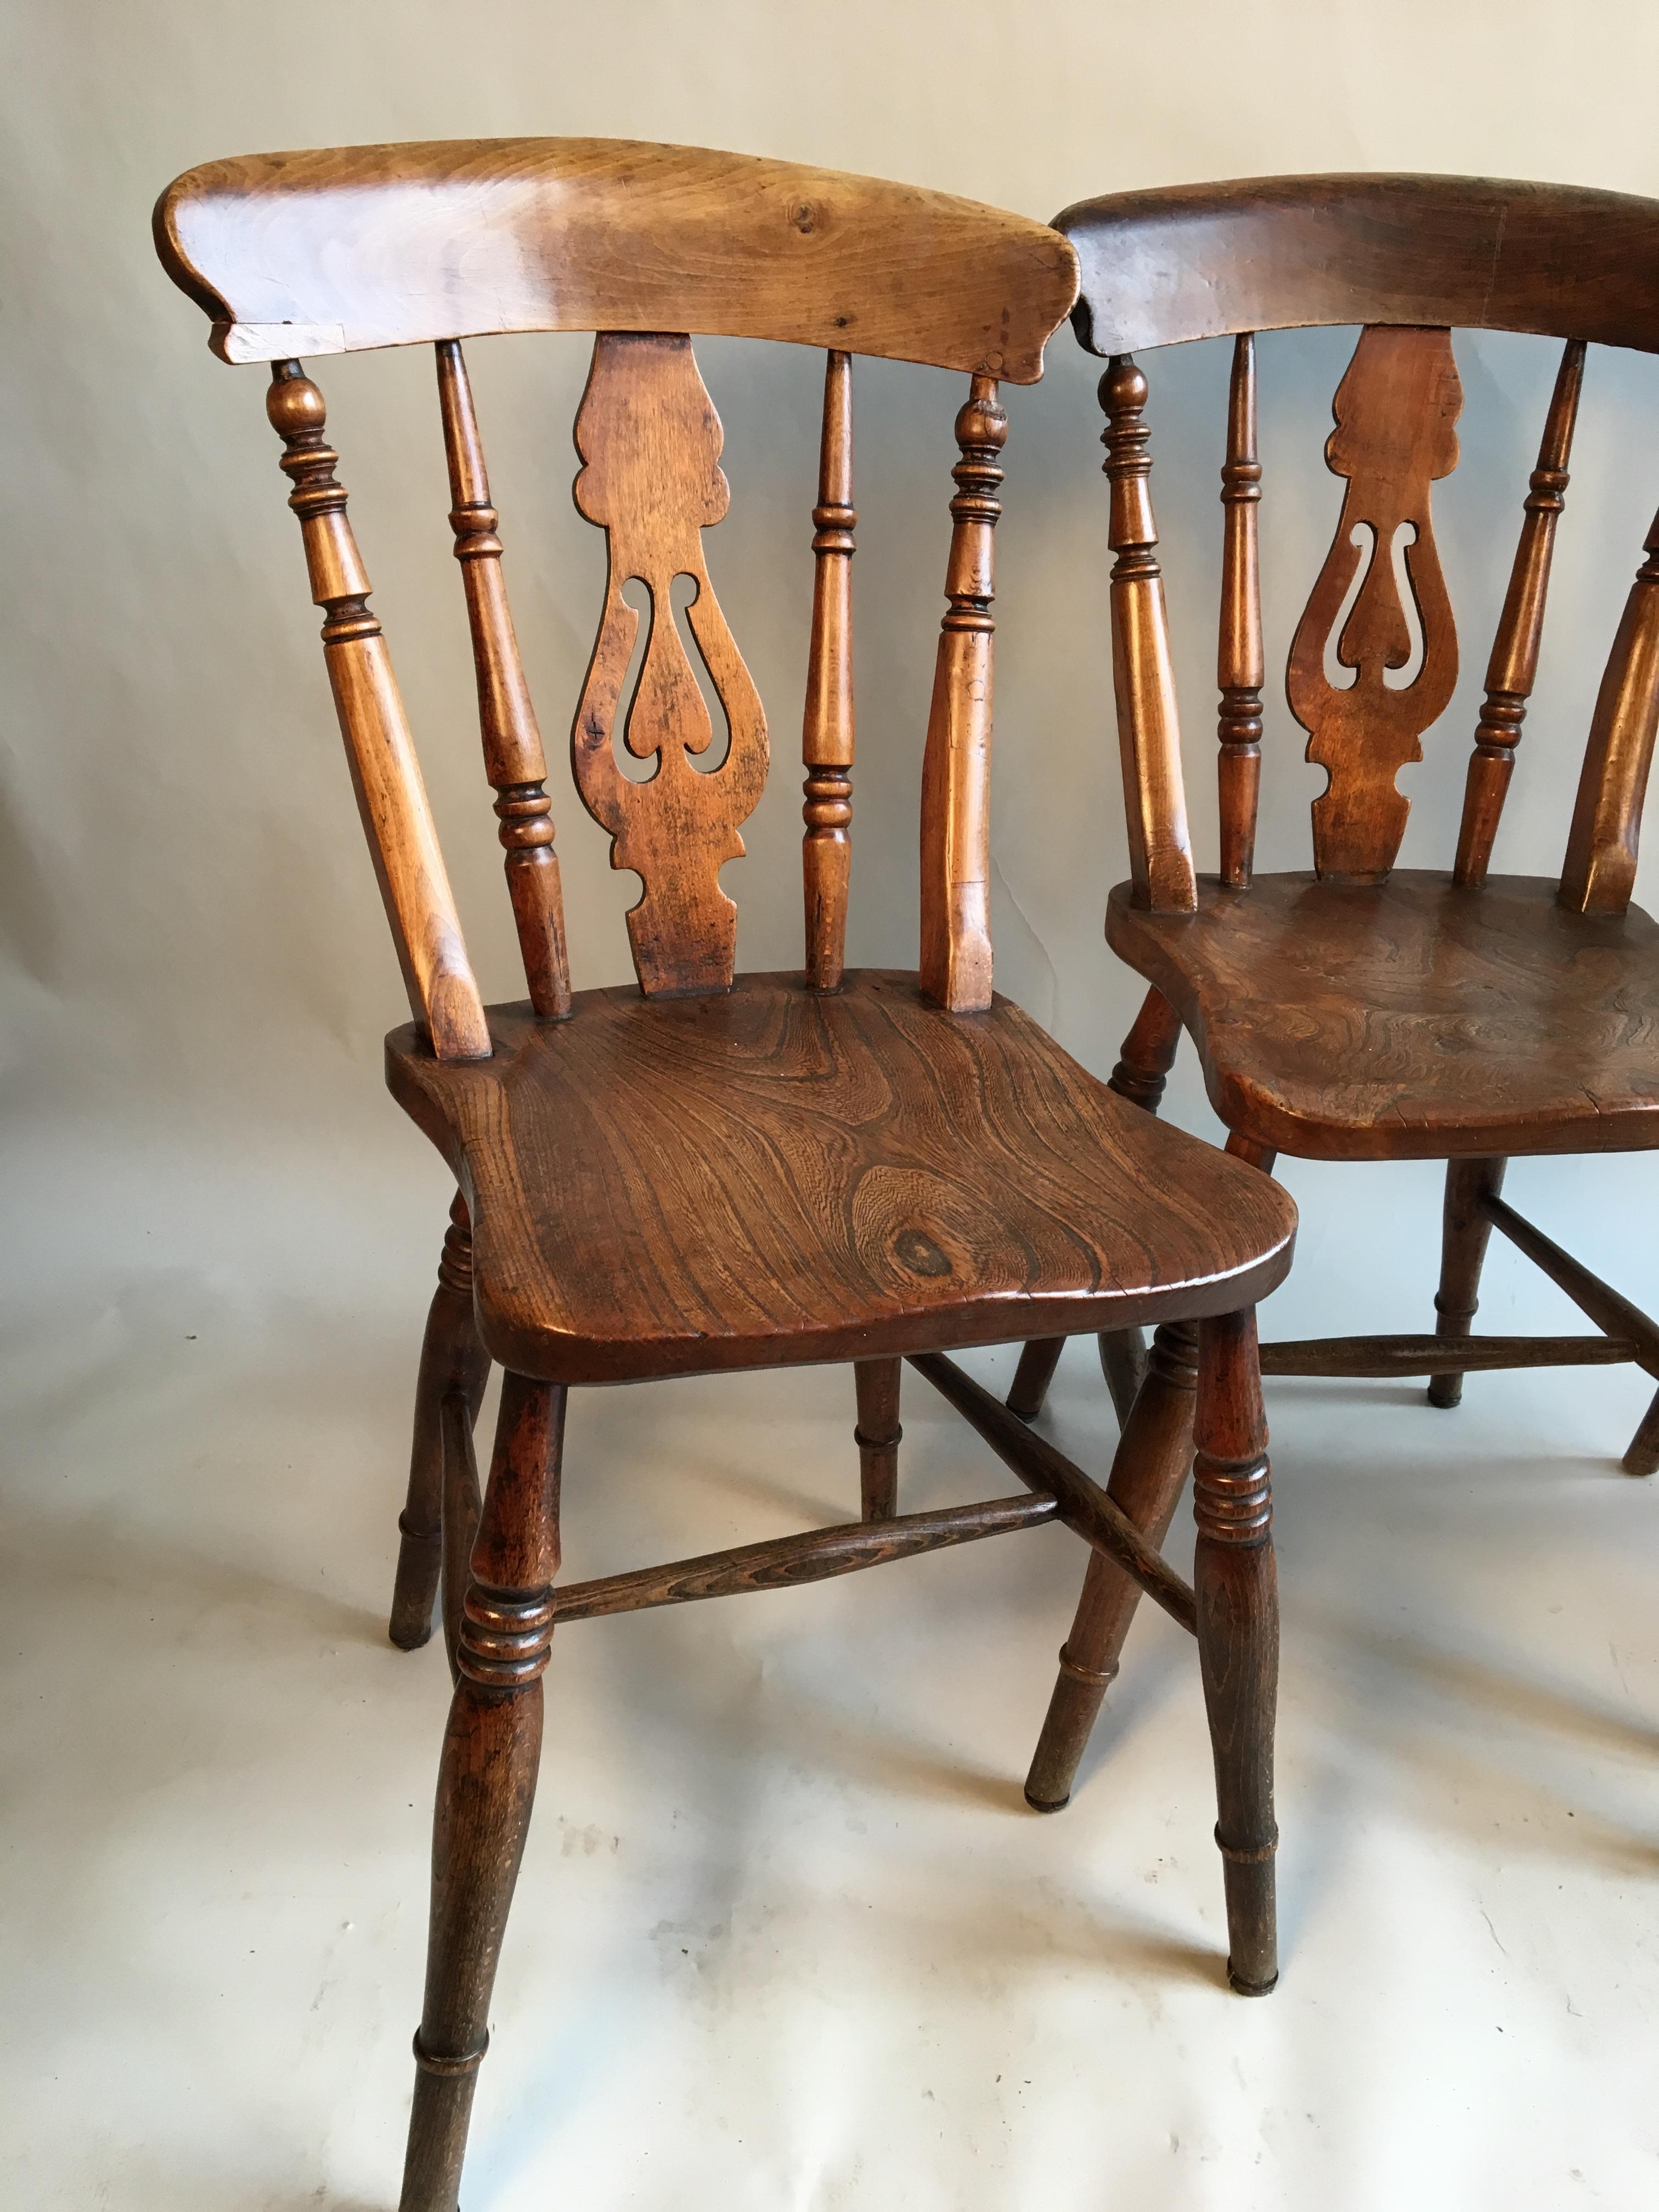 Set of 4 slat-back country chairs in elm with turned legs and wood seat, circa 1850, English.